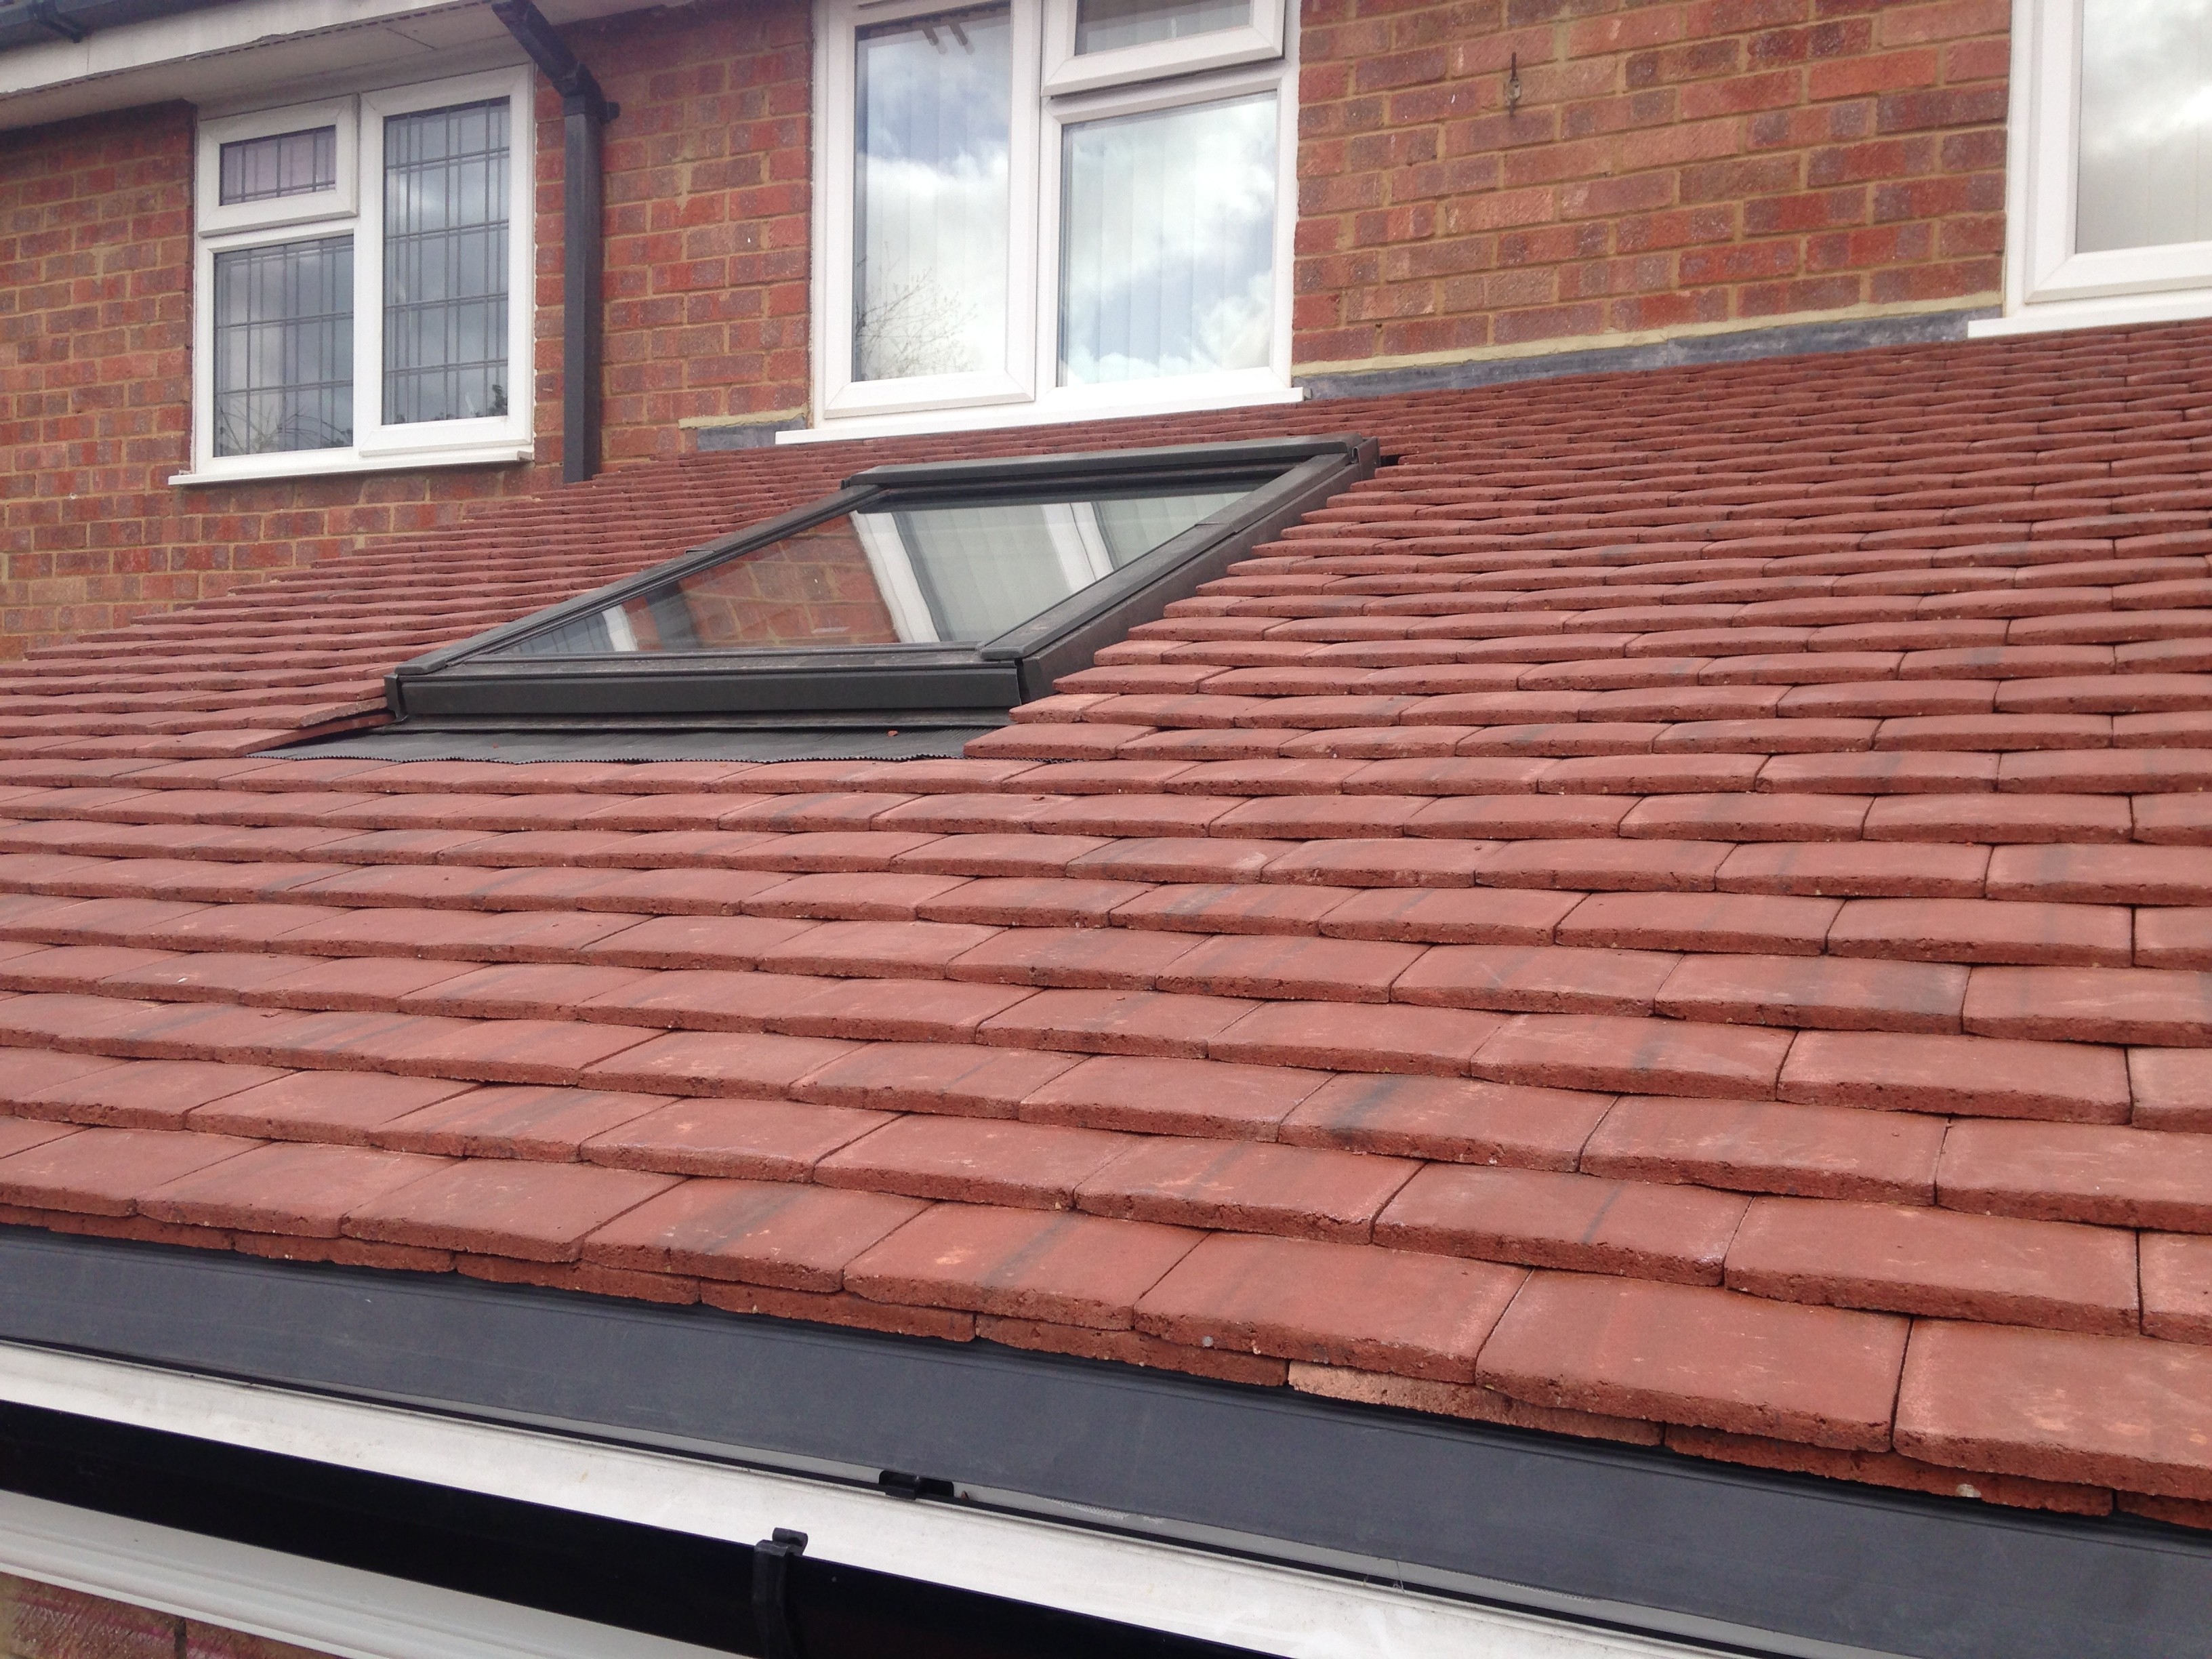 IMG 2117 e1412260366874 - Loft Conversions, Roofing & Building Specialists Loughton